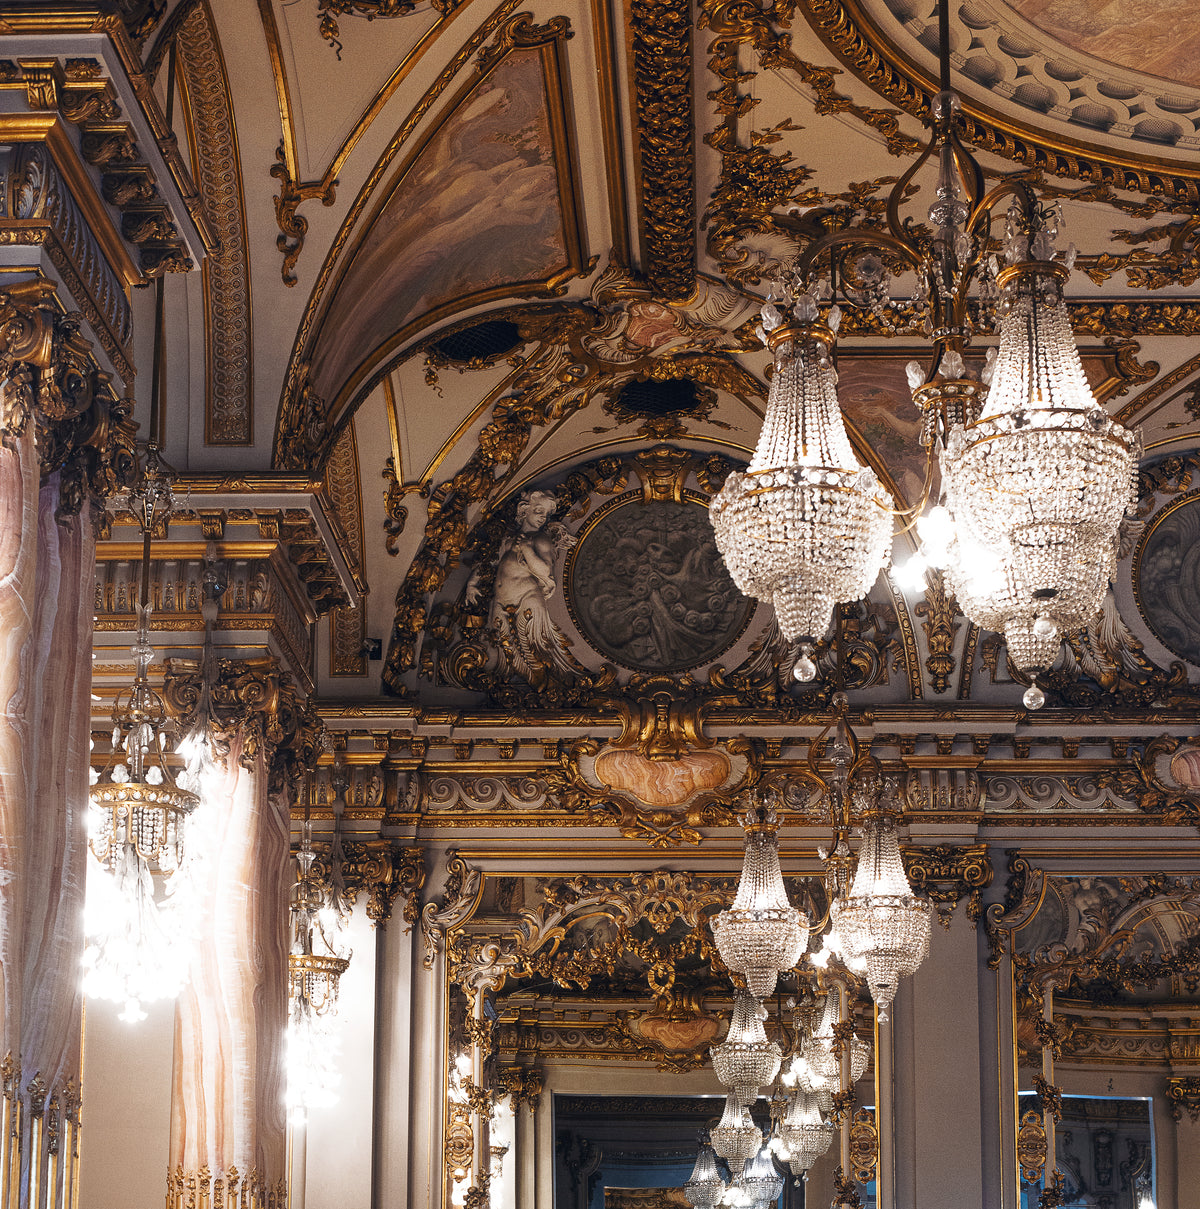 the decor of a large hall with glittering chandeliers